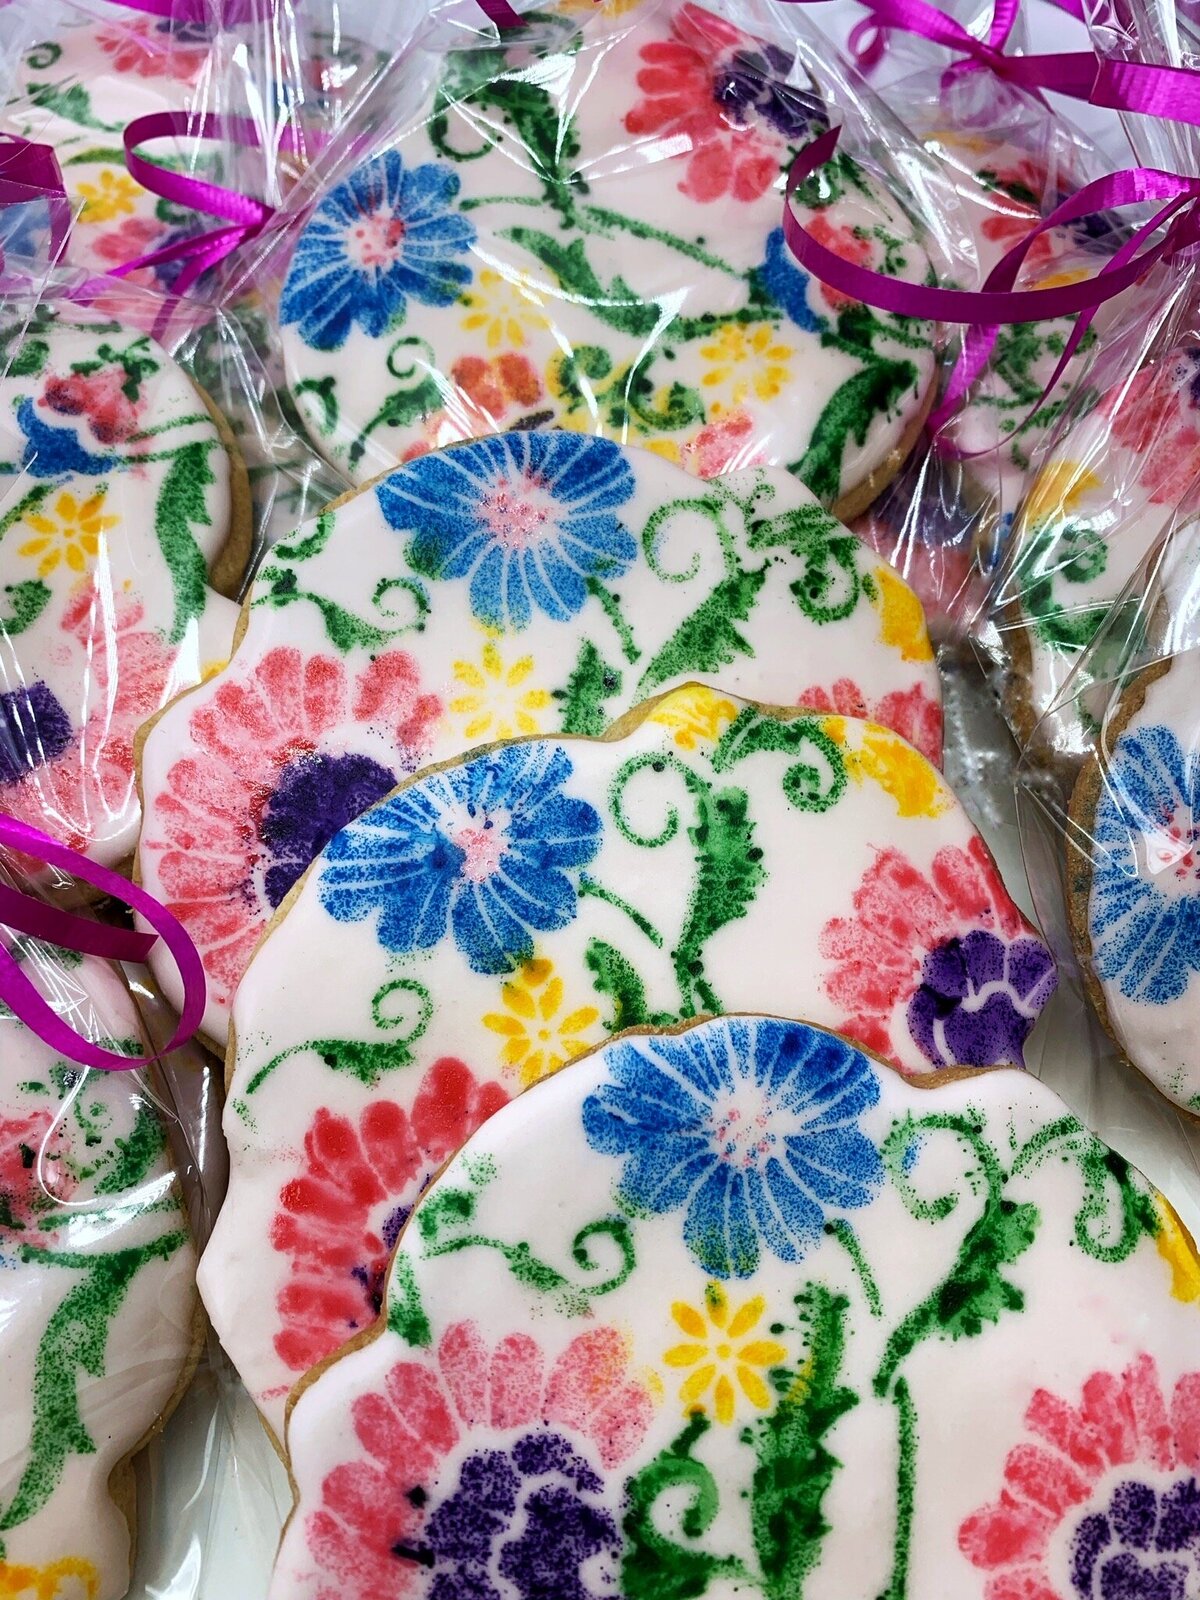 Colorful painted flower cookies in red, pink, yellow, blue, purple, and green